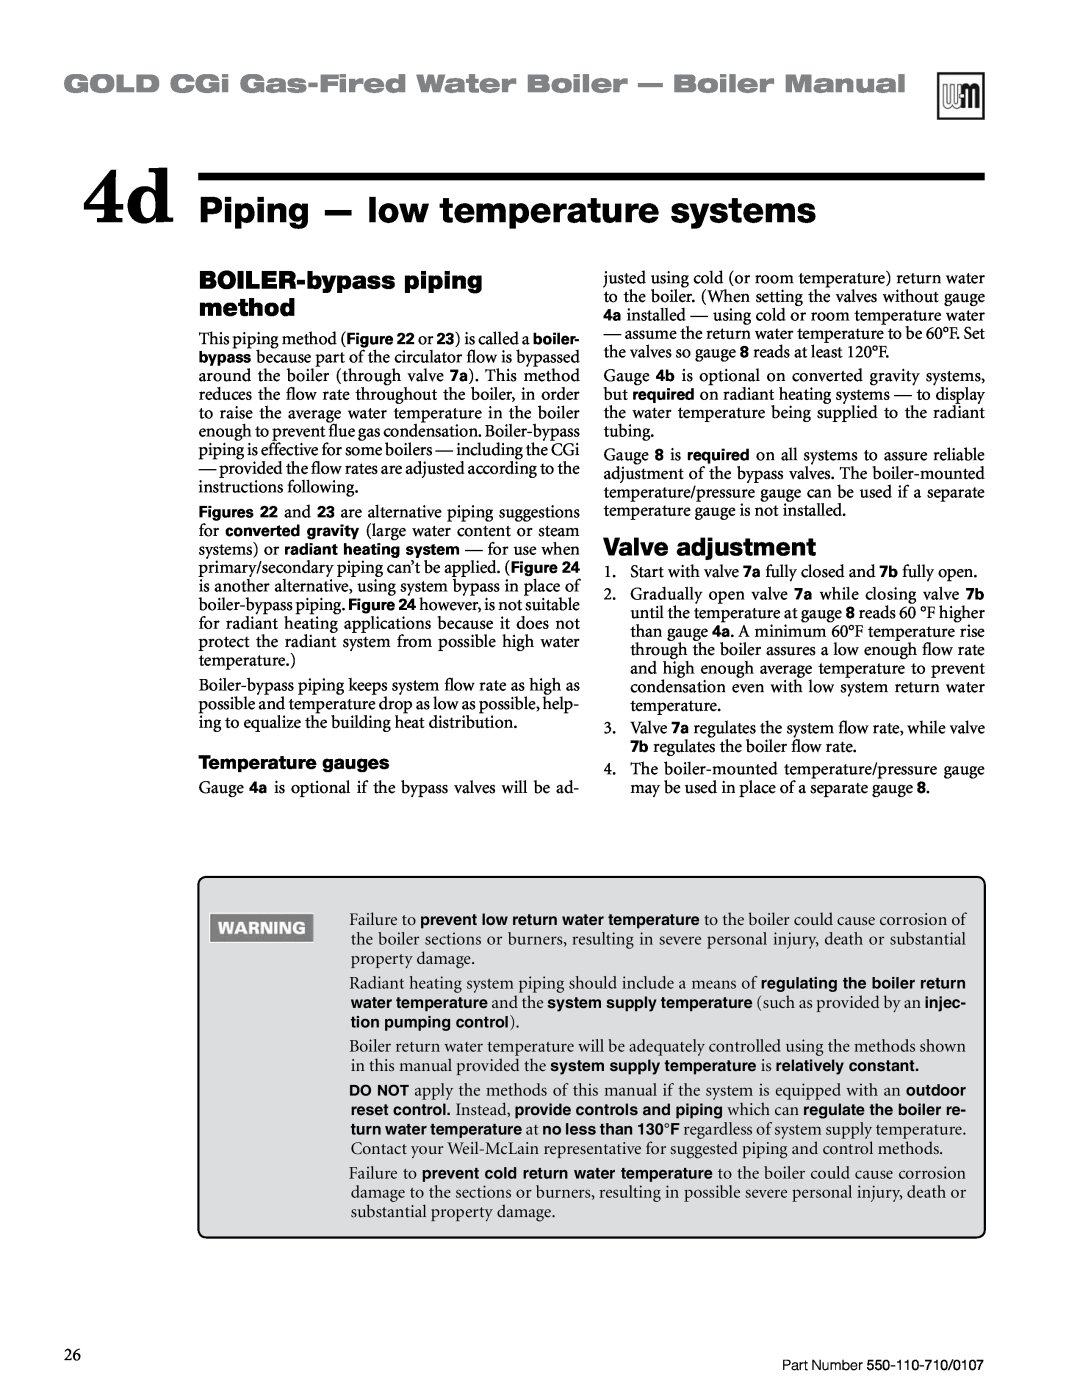 Weil-McLain 550-110-710/0107 manual 4d Piping — low temperature systems, GOLD CGi Gas-FiredWater Boiler — Boiler Manual 